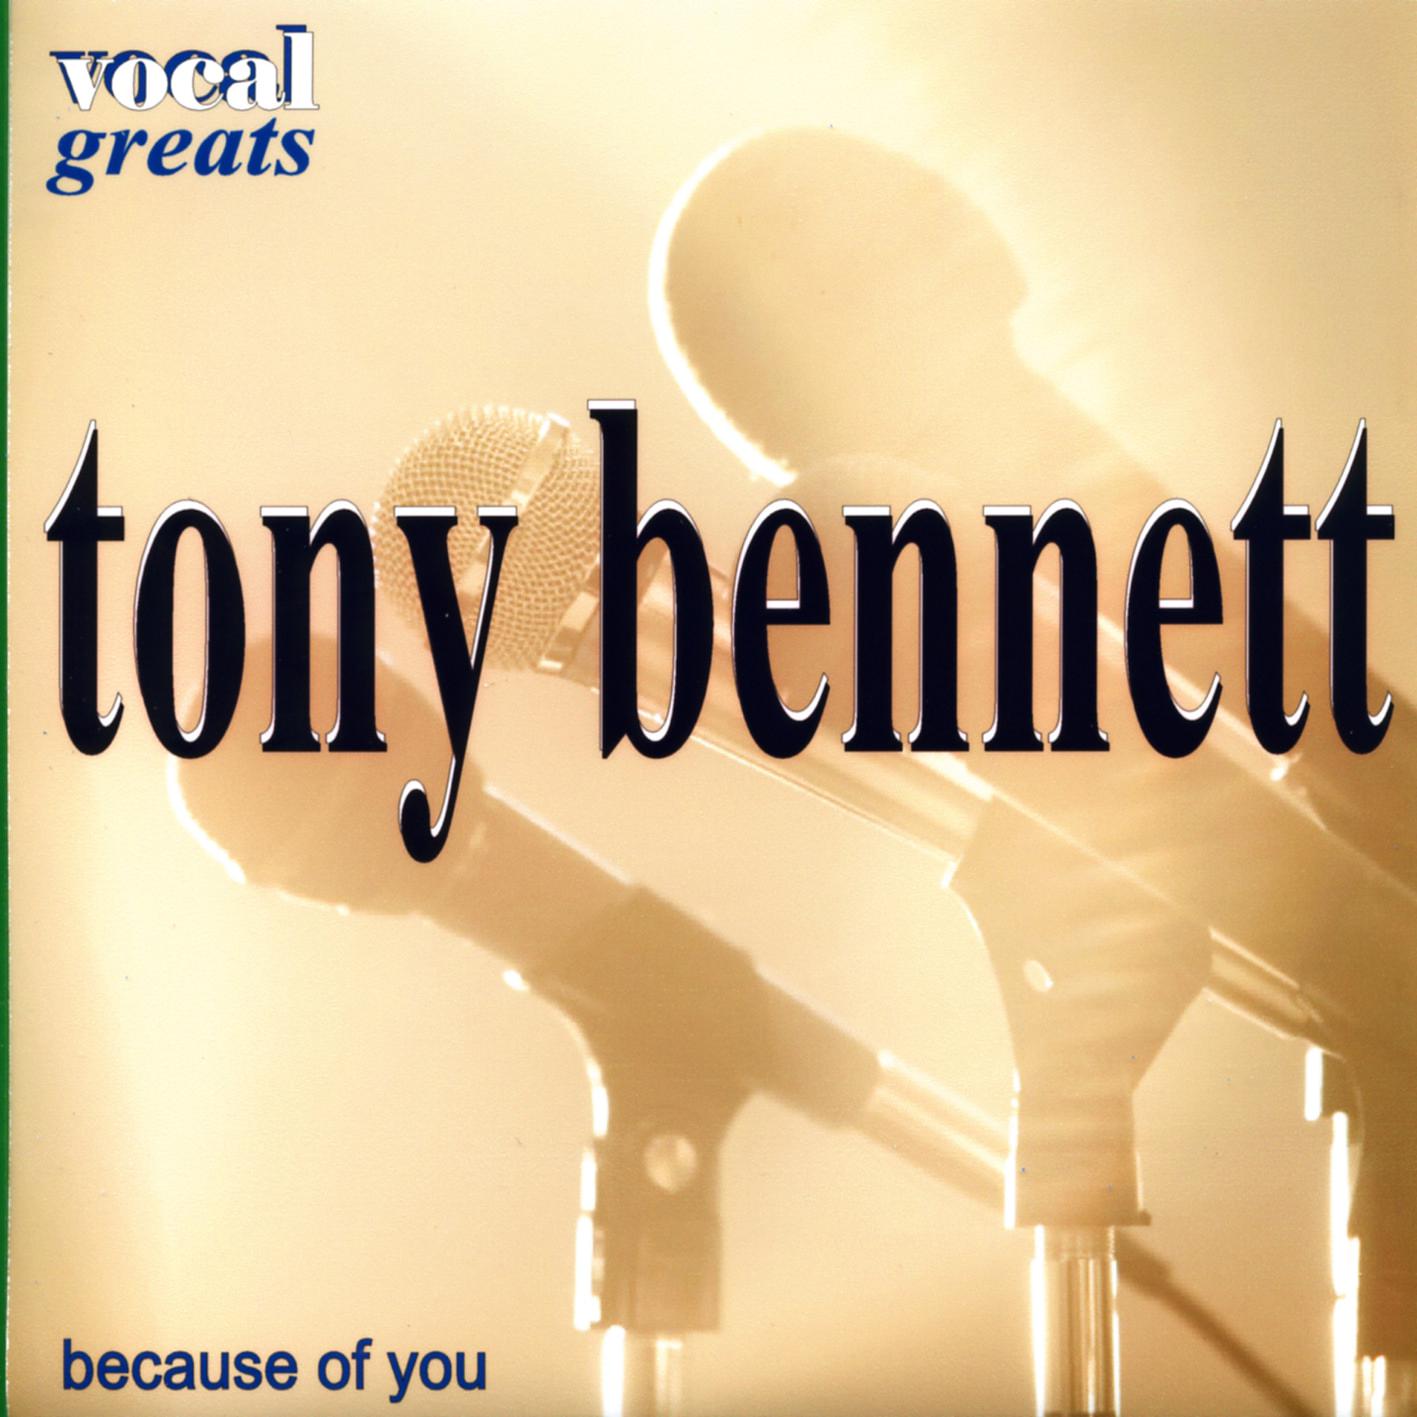 Vocal Greats - Tony Bennett - Because Of You